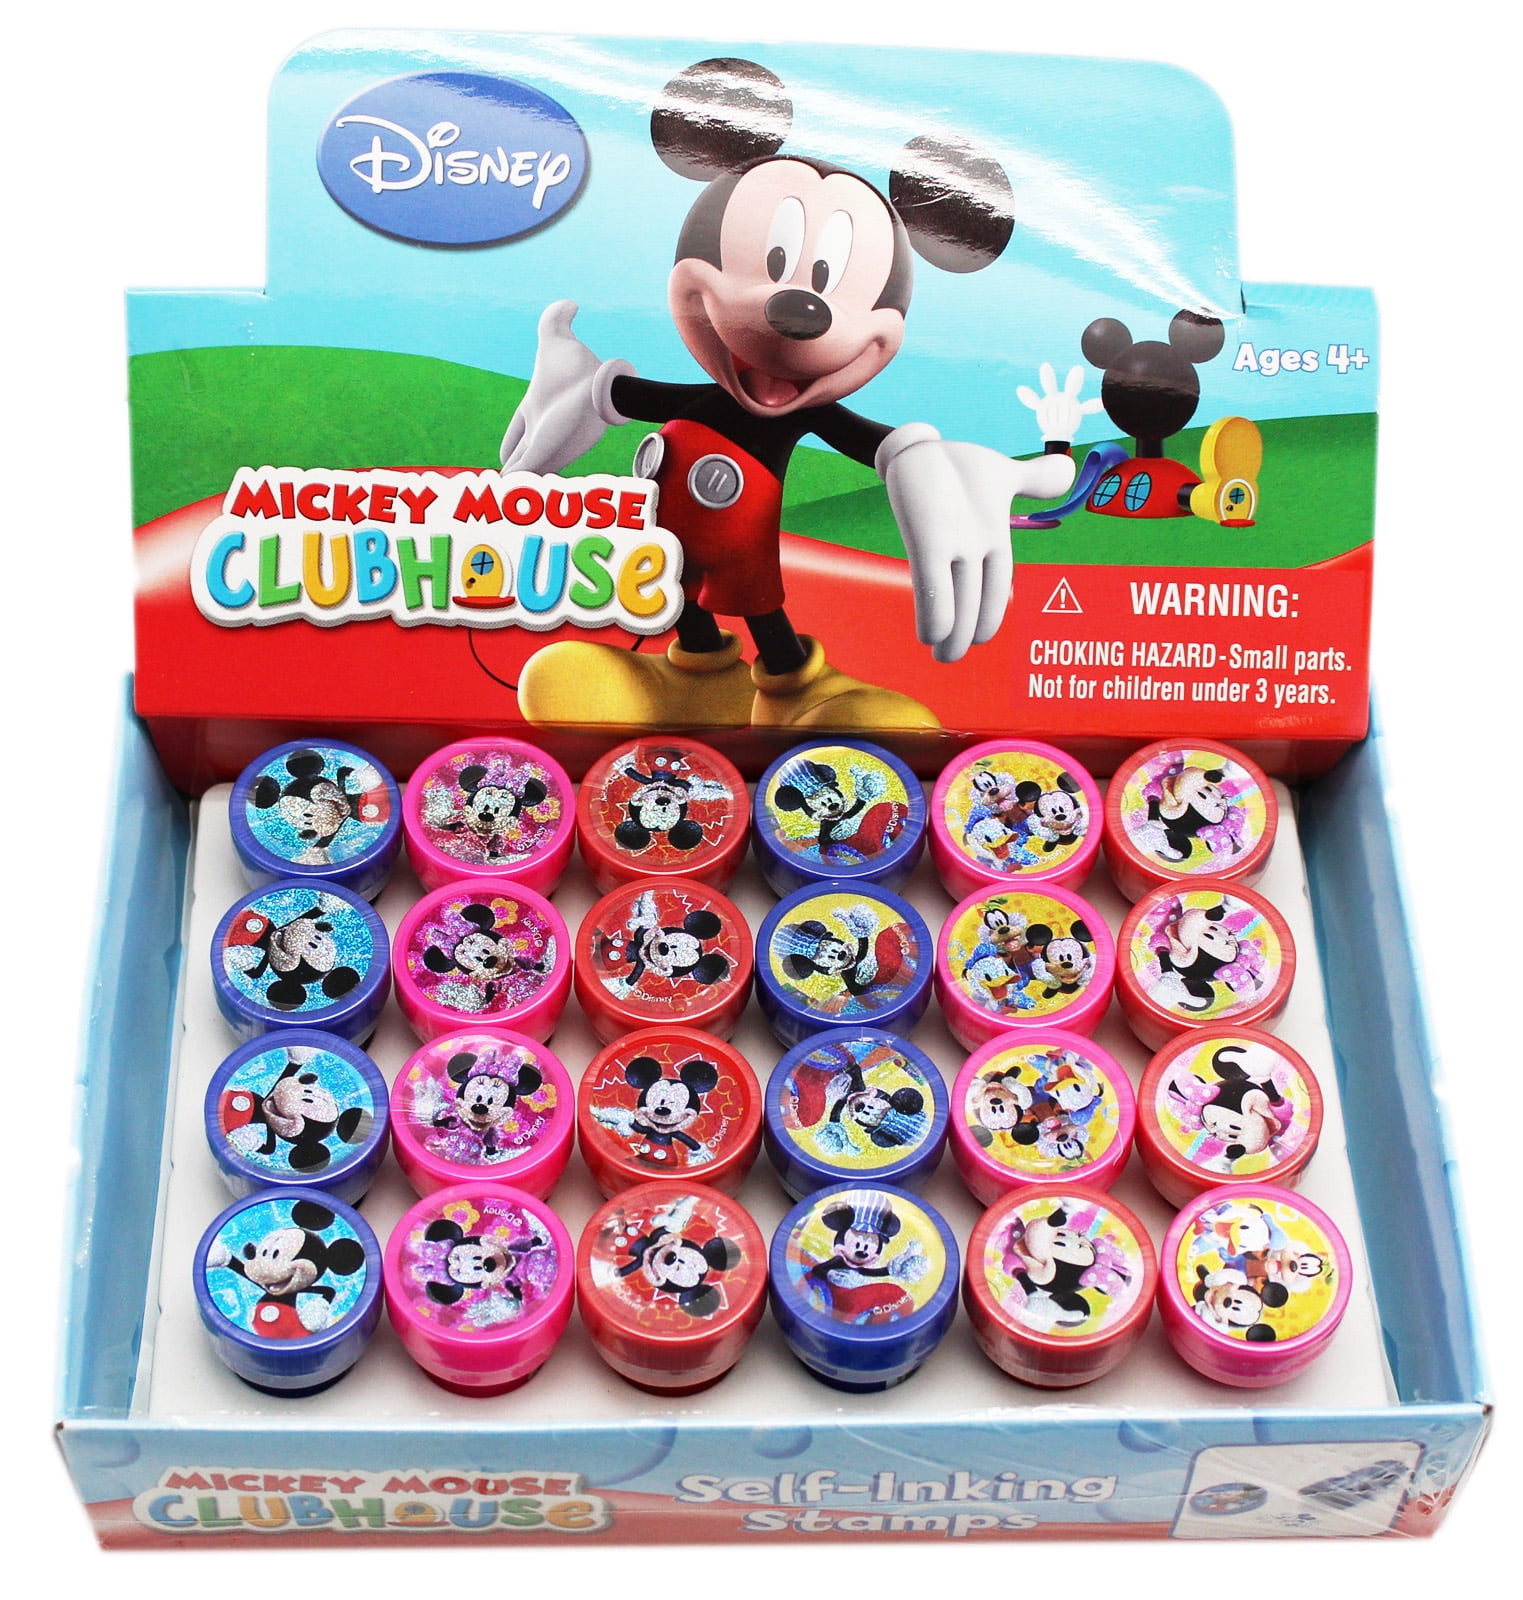 Disney's Mickey Mouse and Friends Radomly Chosen Stamp Set (3 Stamps)